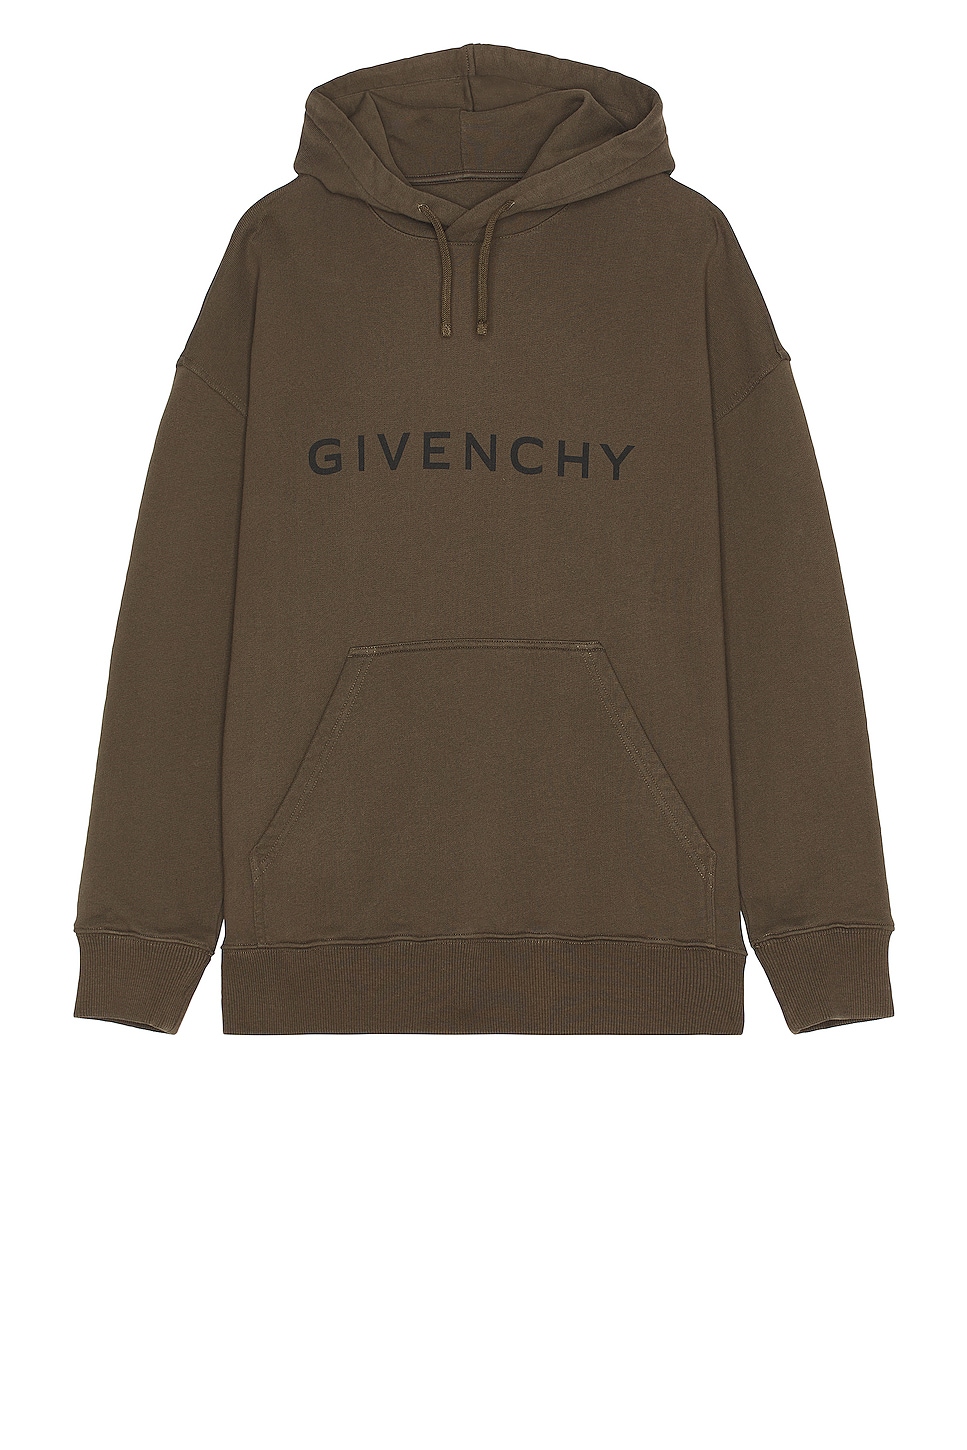 Image 1 of Givenchy Slim Fit Hoodie in Khaki